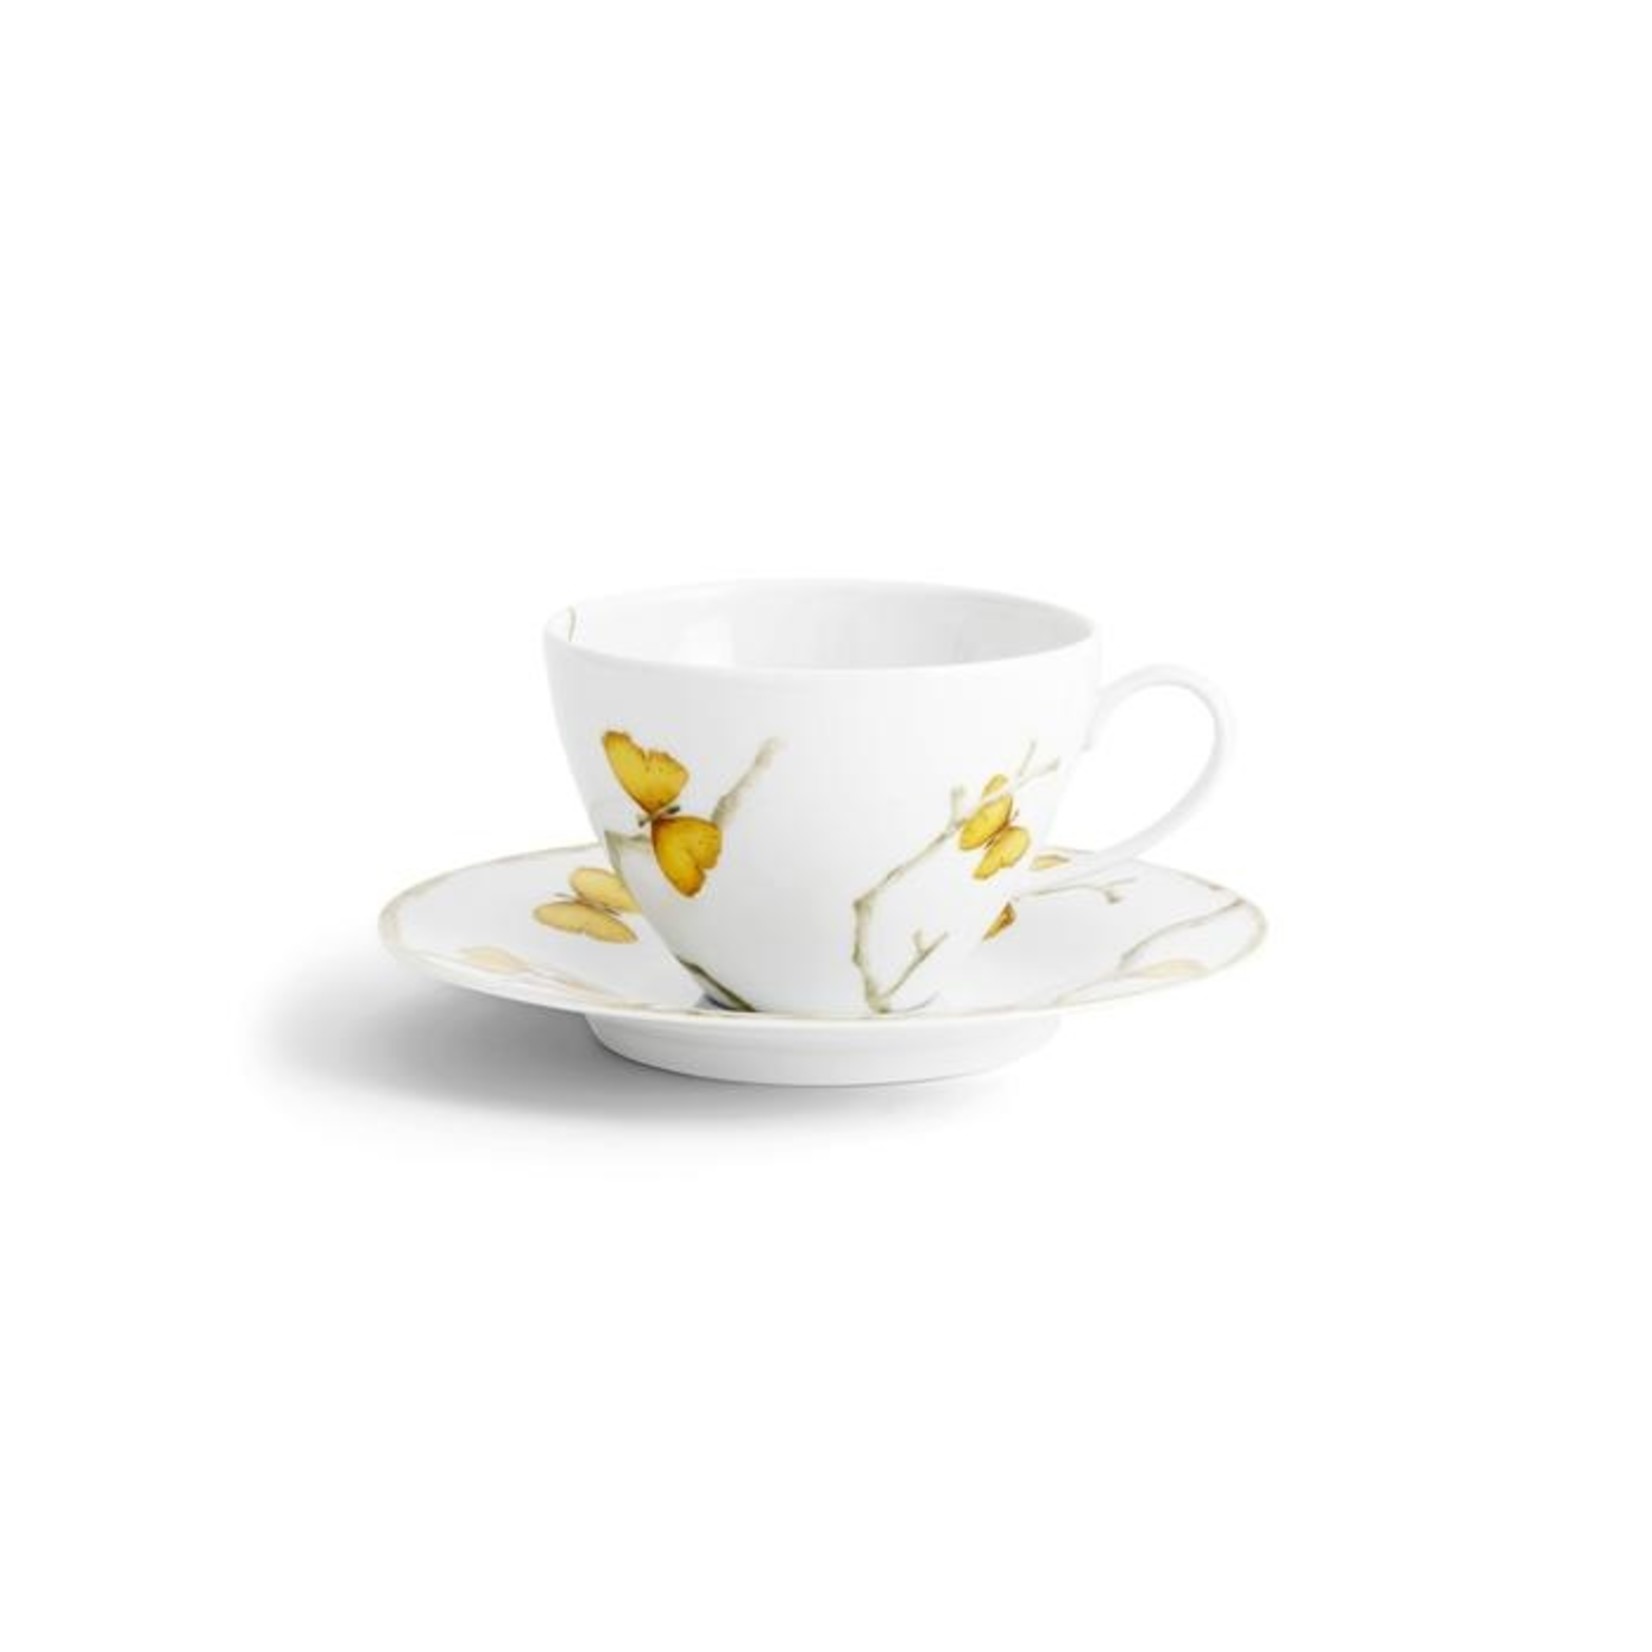 Michael Aram Butterfly Ginkgo Breakfast Cup and Saucer Set